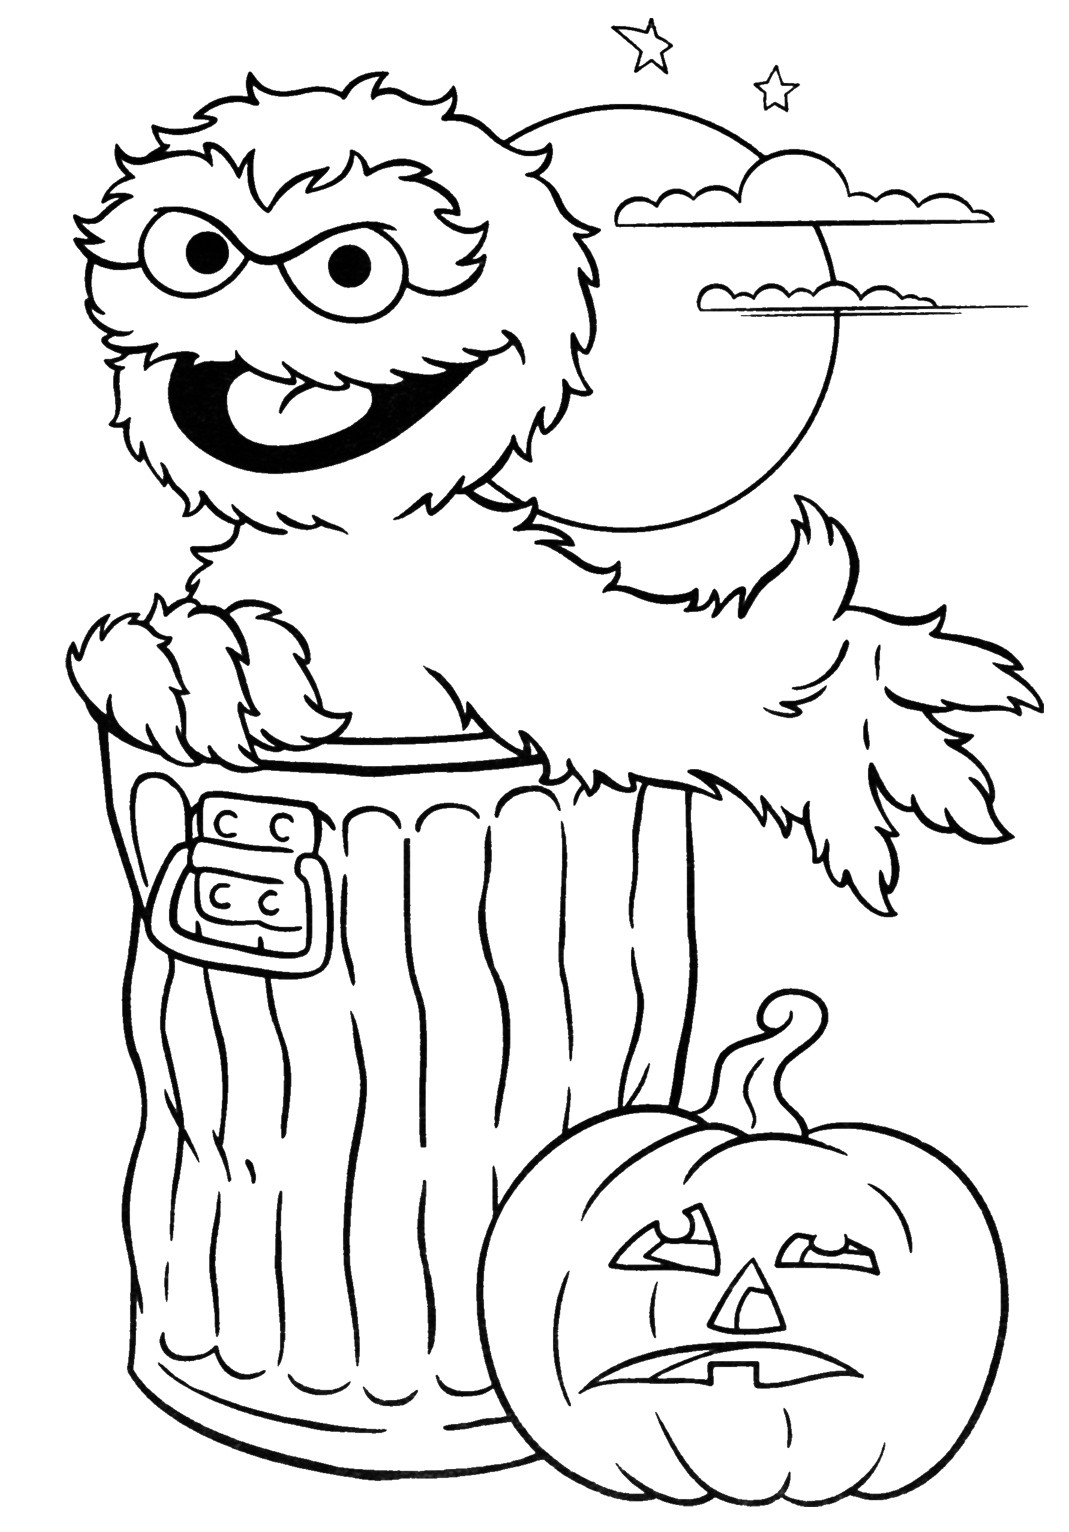 Coloring Pages For Kids Halloween
 Halloween Printable Coloring Pages Minnesota Miranda